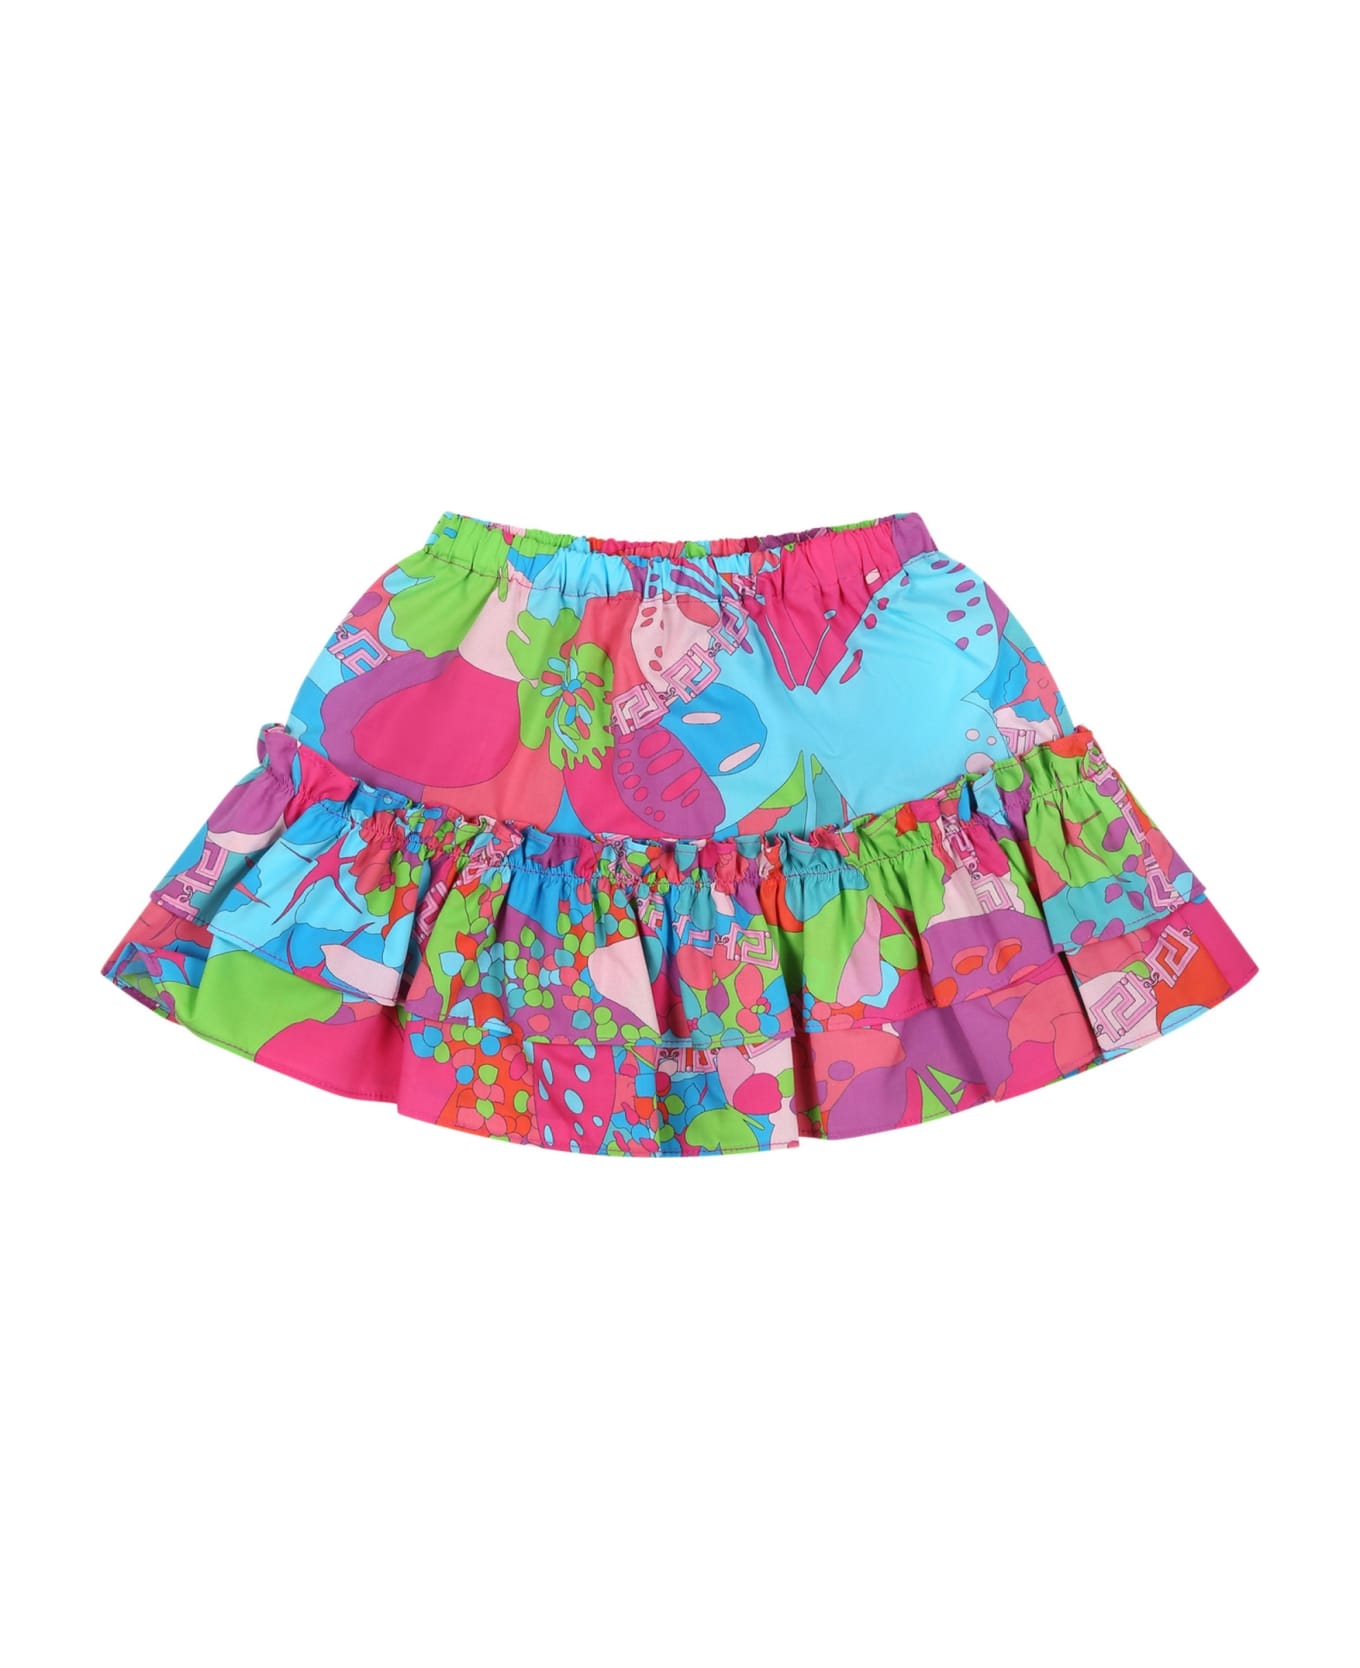 Versace Multicolor Skirt For Girl With Logo And Print - Multicolor